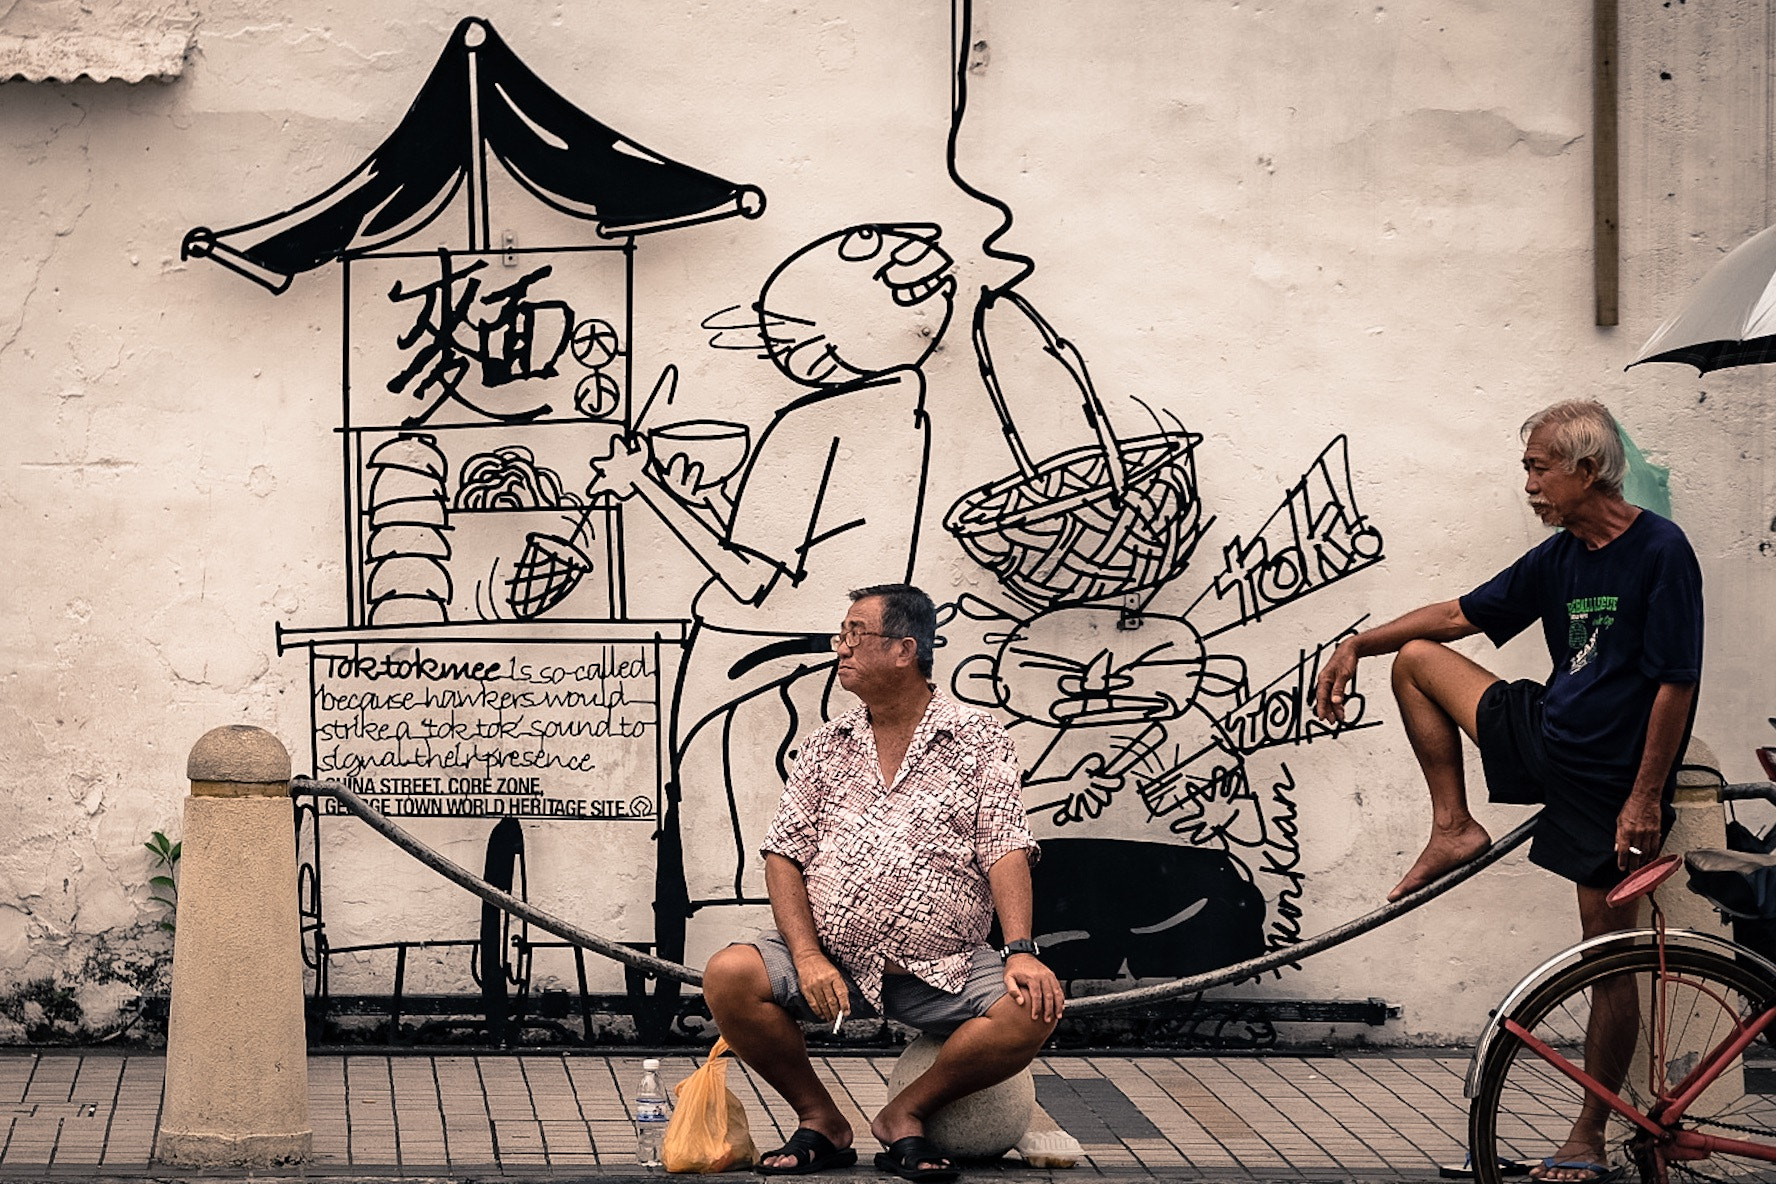 Fujifilm X-T10 sample photo. Two men and an artwork photography